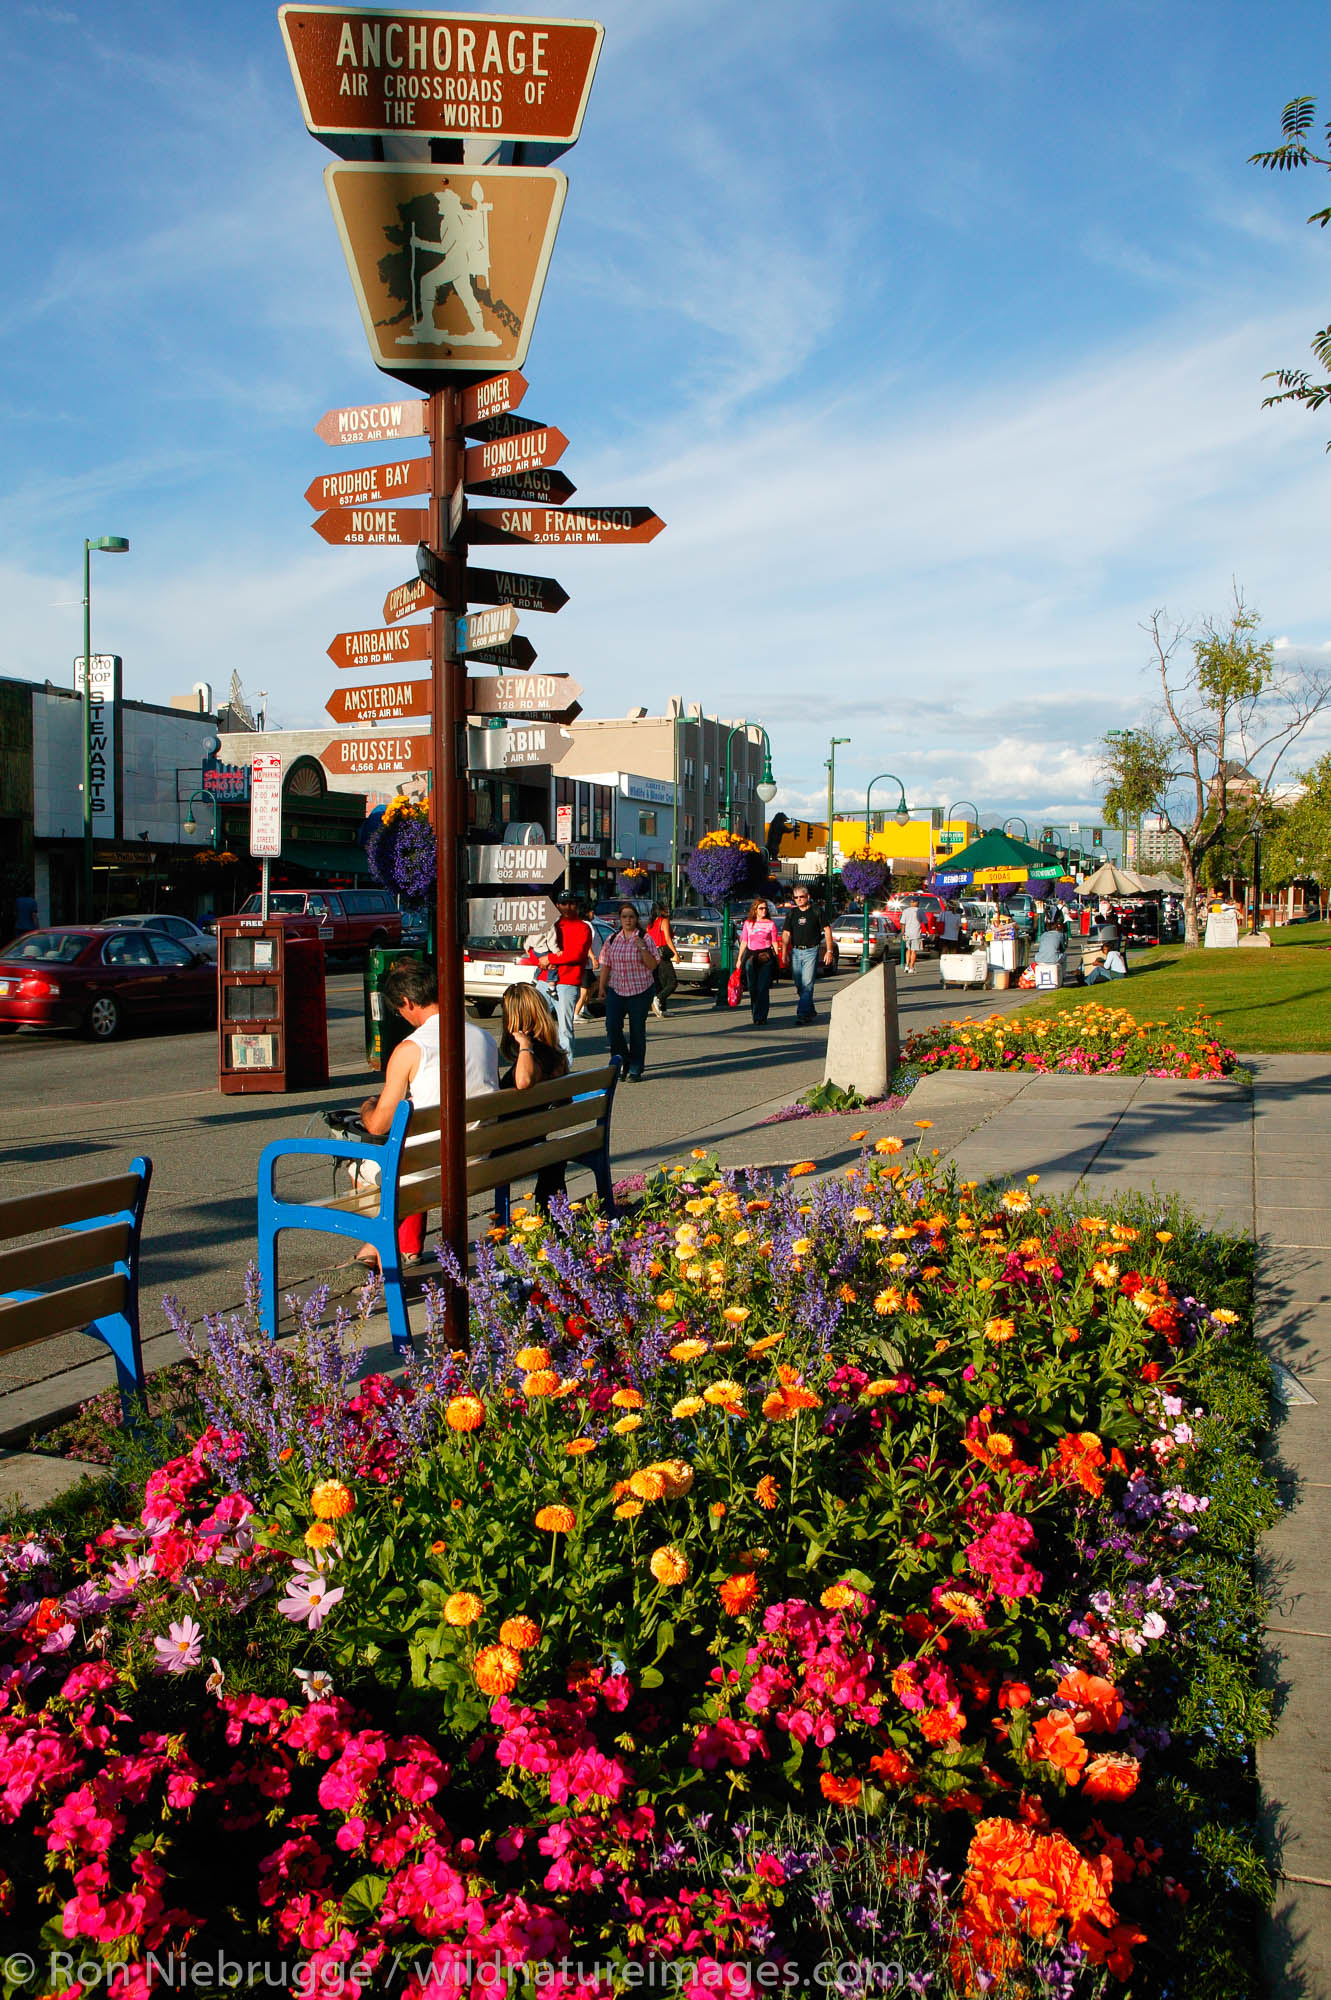 The Visitor Information Center in Downtown Anchorage, Alaska.